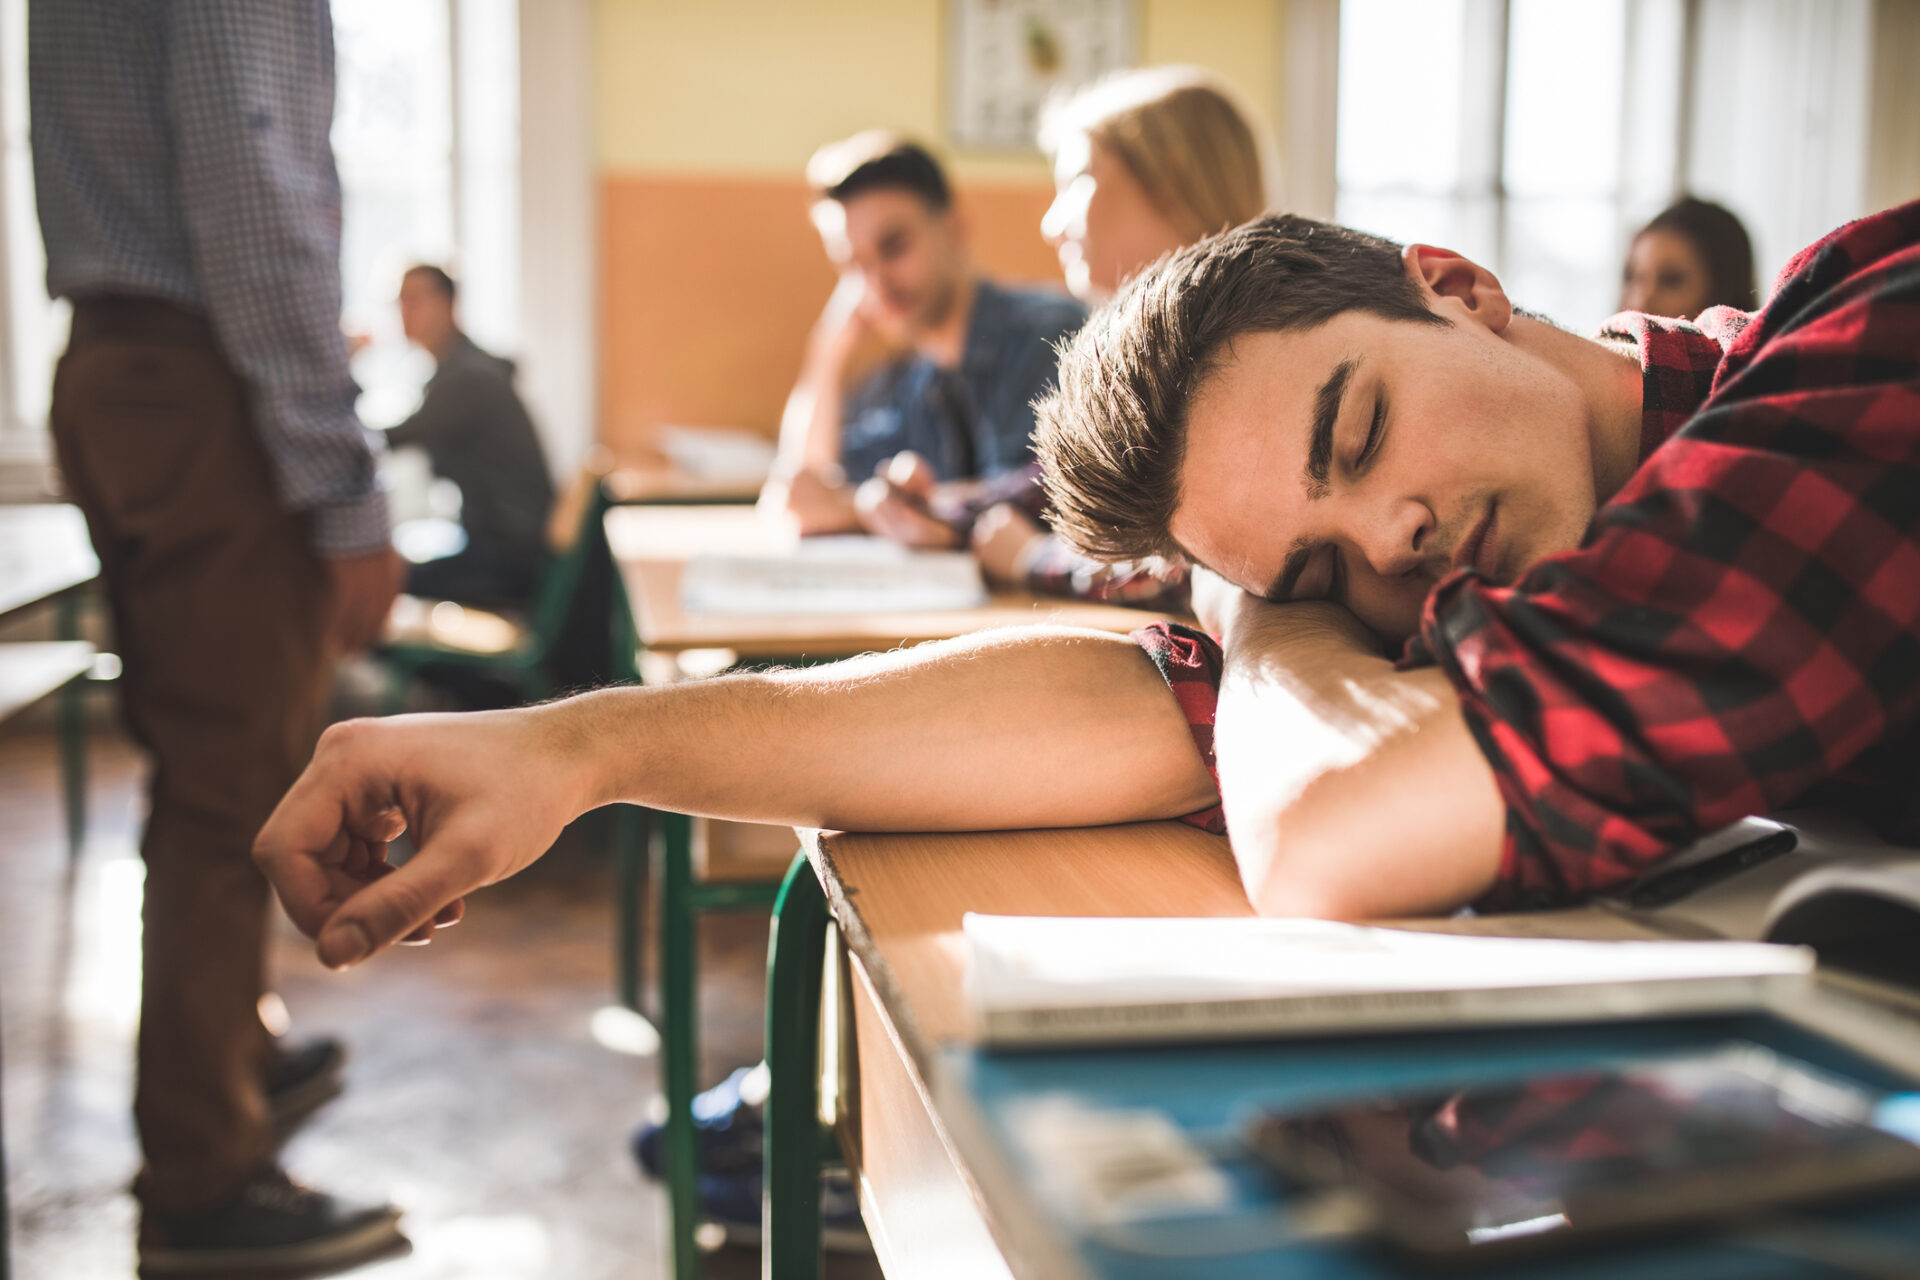 As for adolescents, it's a common myth that they need less sleep and can handle only seven or eight hours. They actually need nine hours of sleep. Ado¬lescents are typically the most sleep-deprived age group in school. 